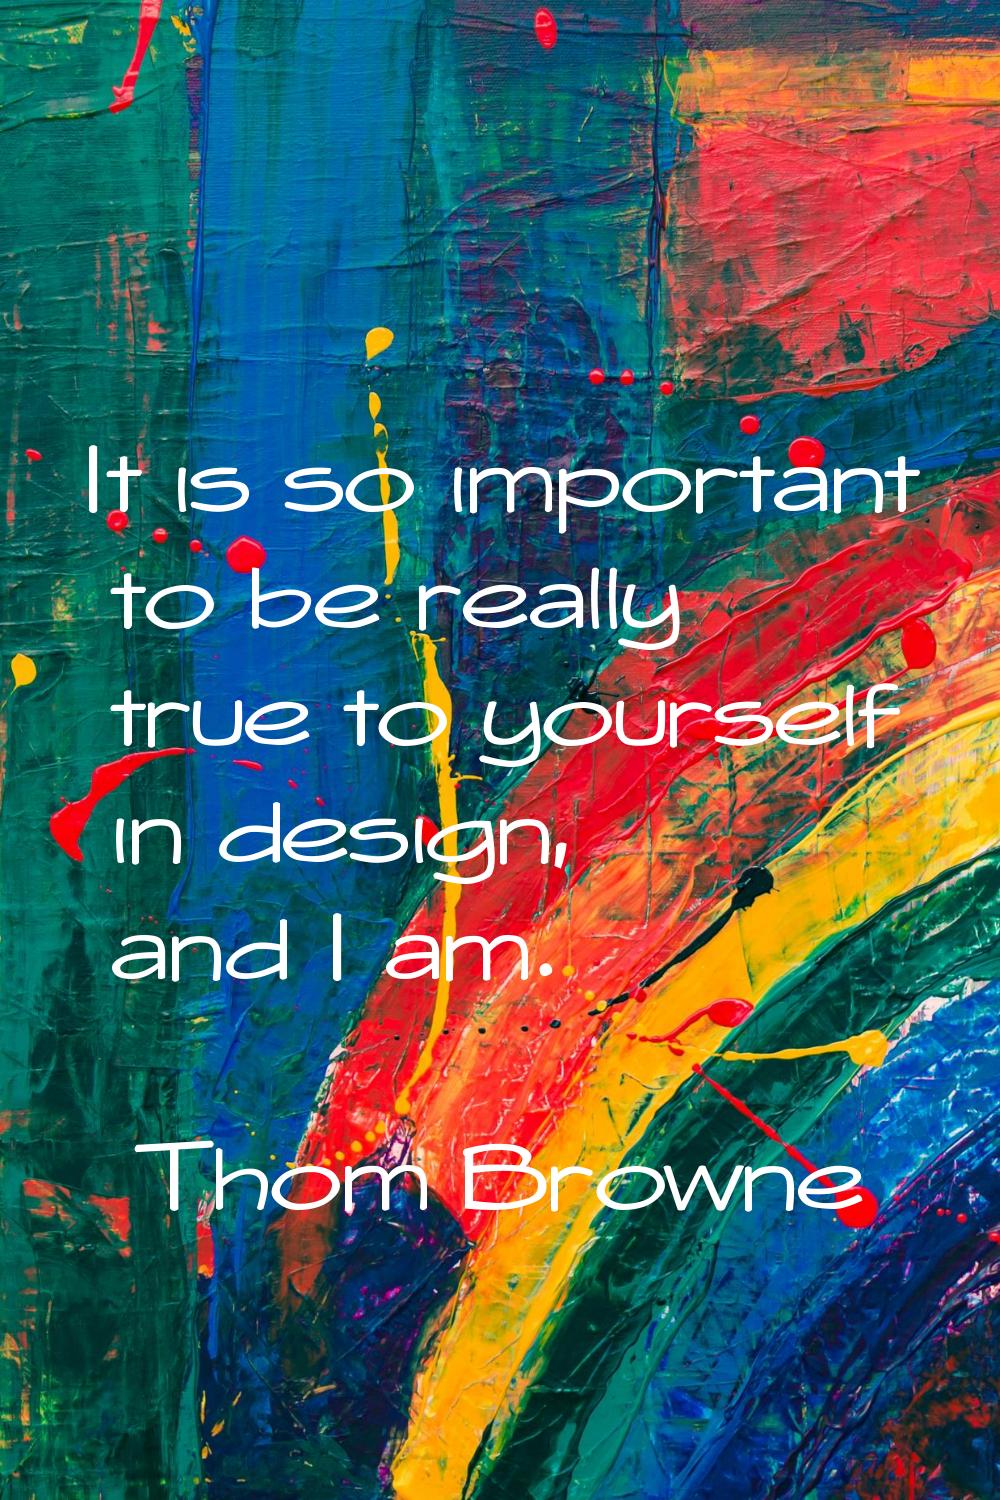 It is so important to be really true to yourself in design, and I am.